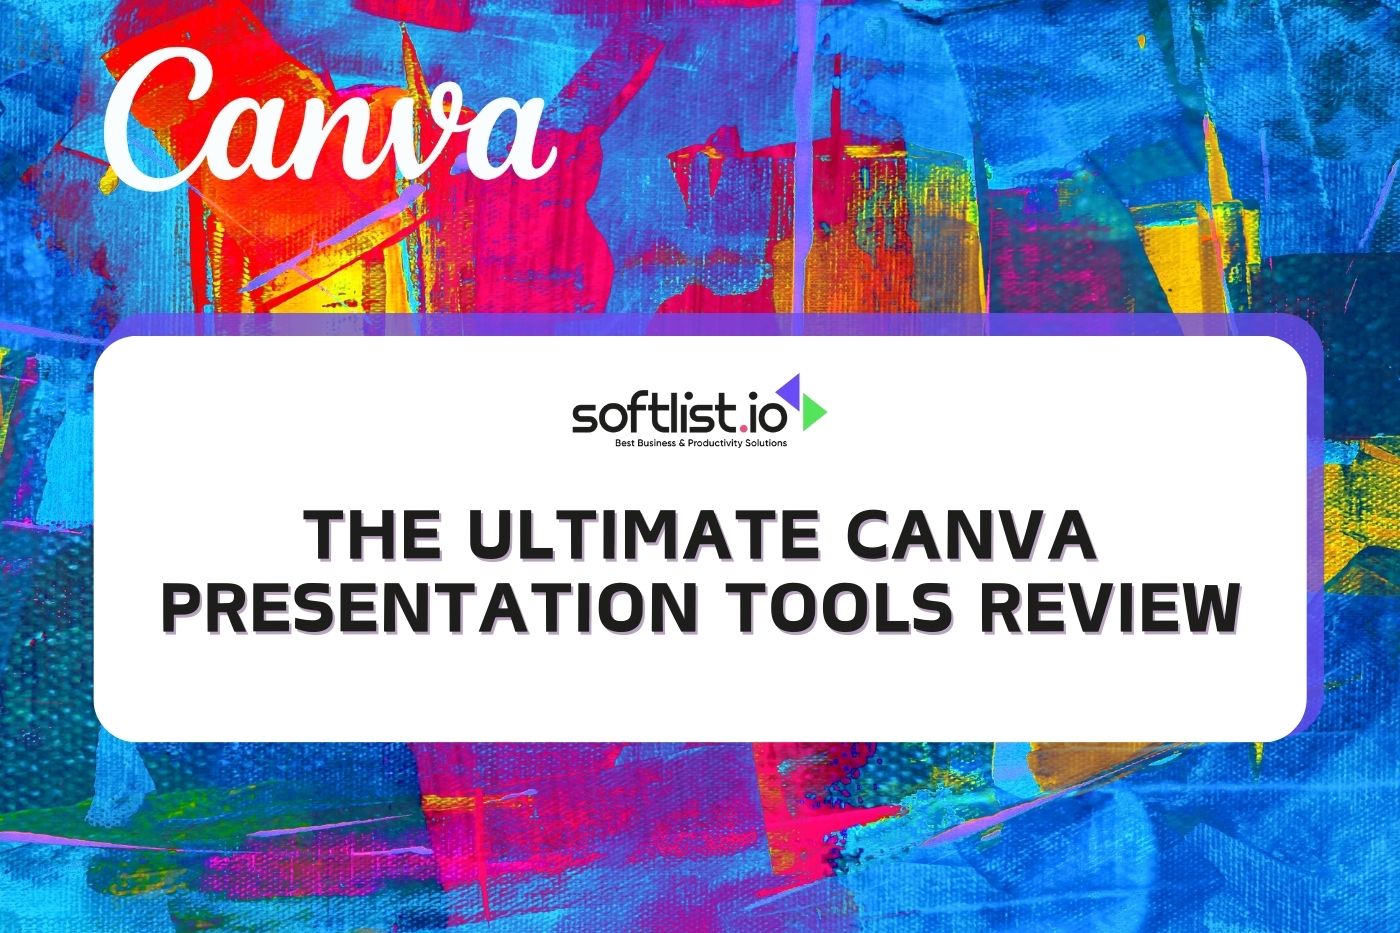 The Ultimate Canva Presentation Tools Review